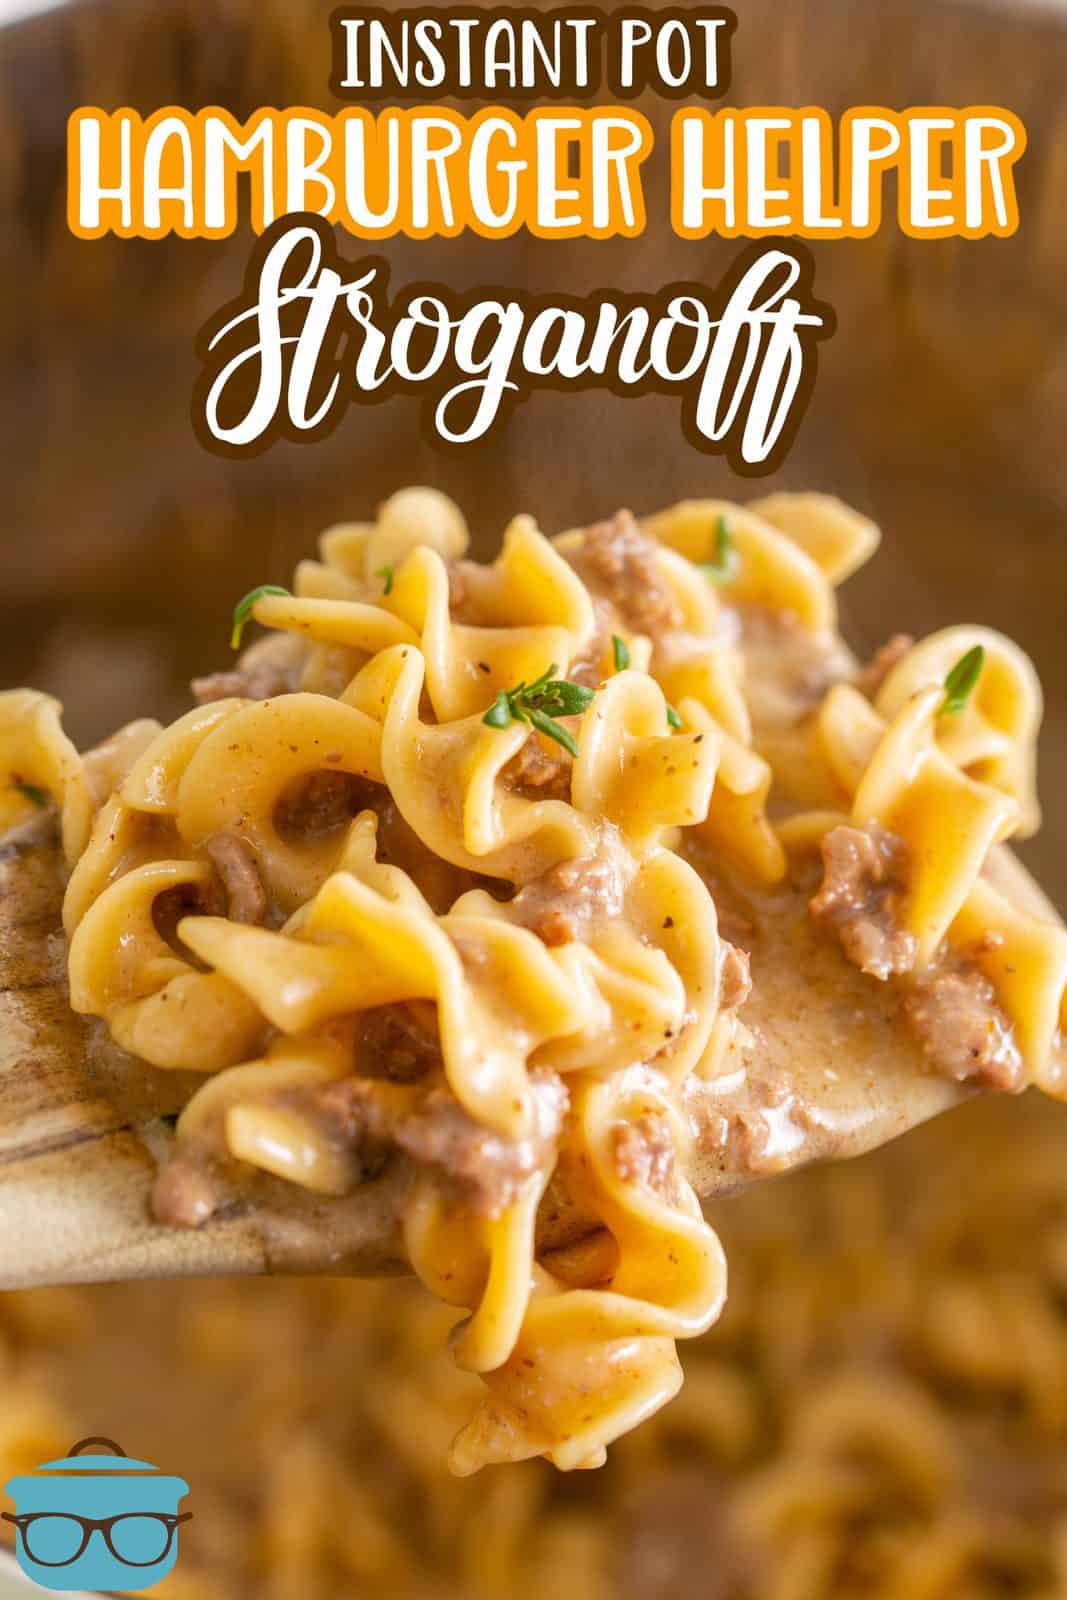 Close up of spoon holding up some Instant Pot Hamburger Helper Beef Stroganoff showing noodles and creaminess Pinterest image.